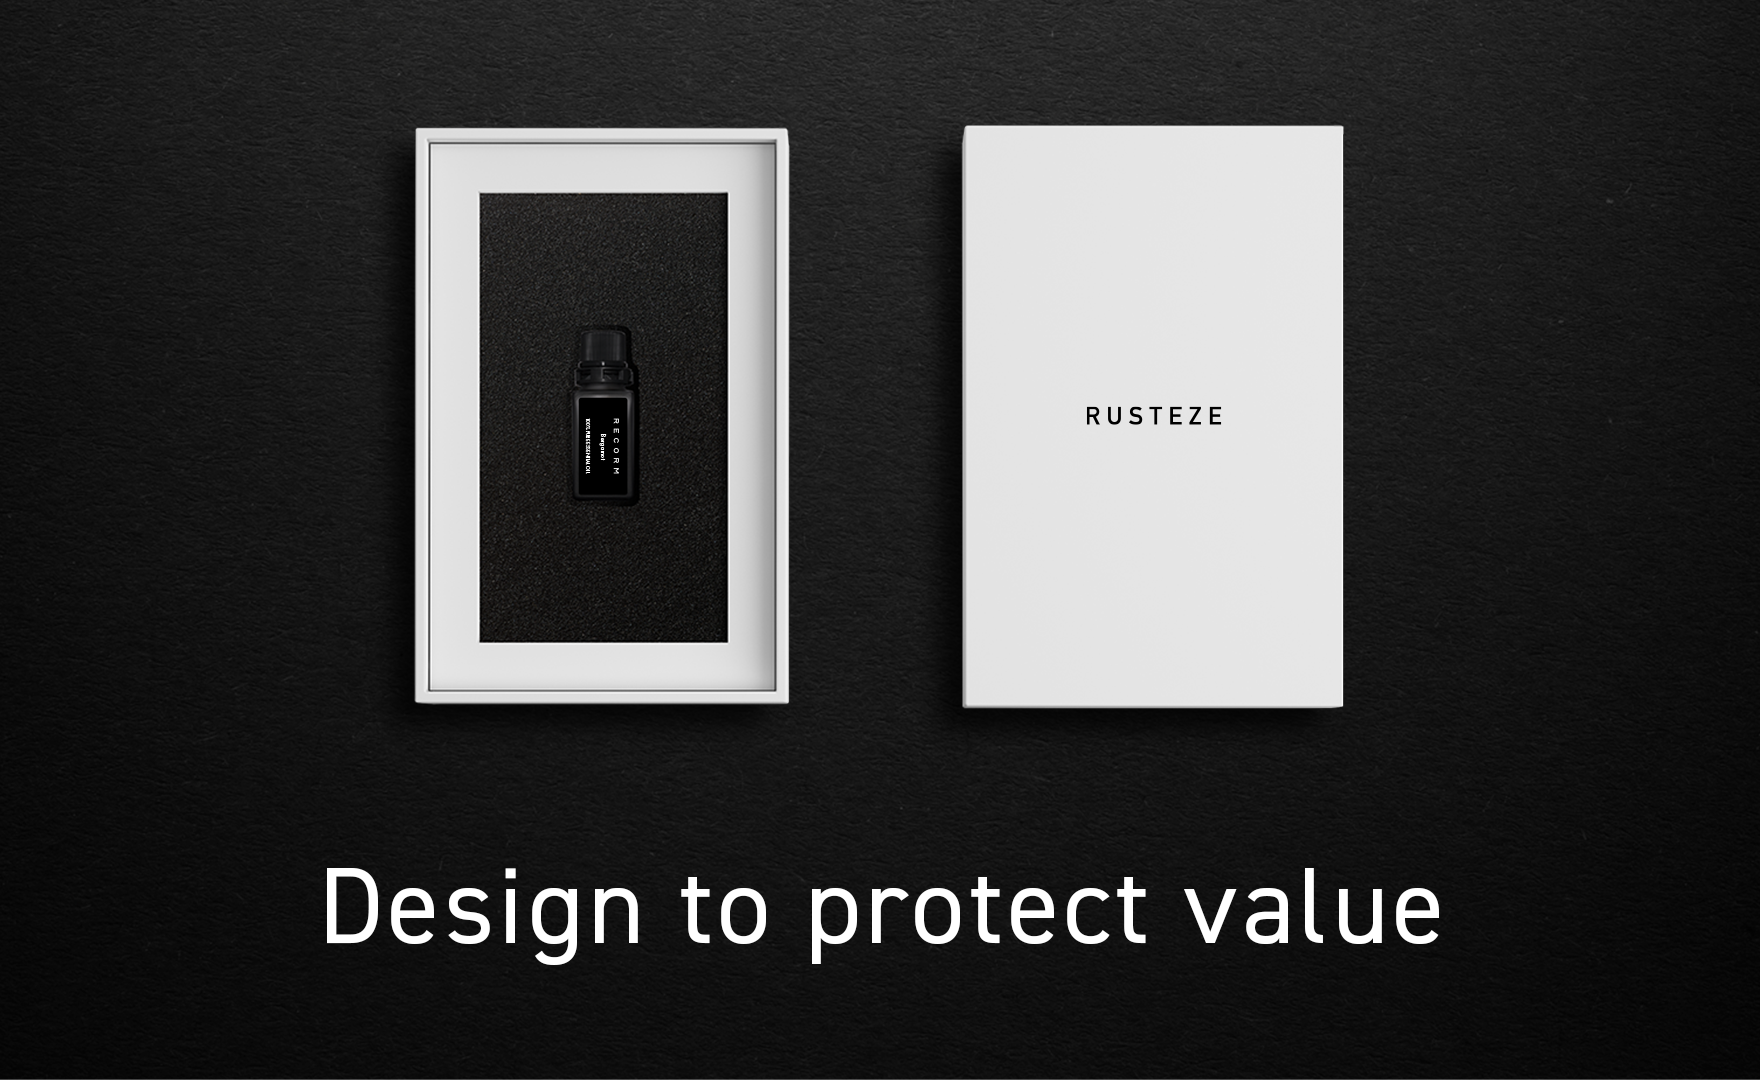 Design to protect value